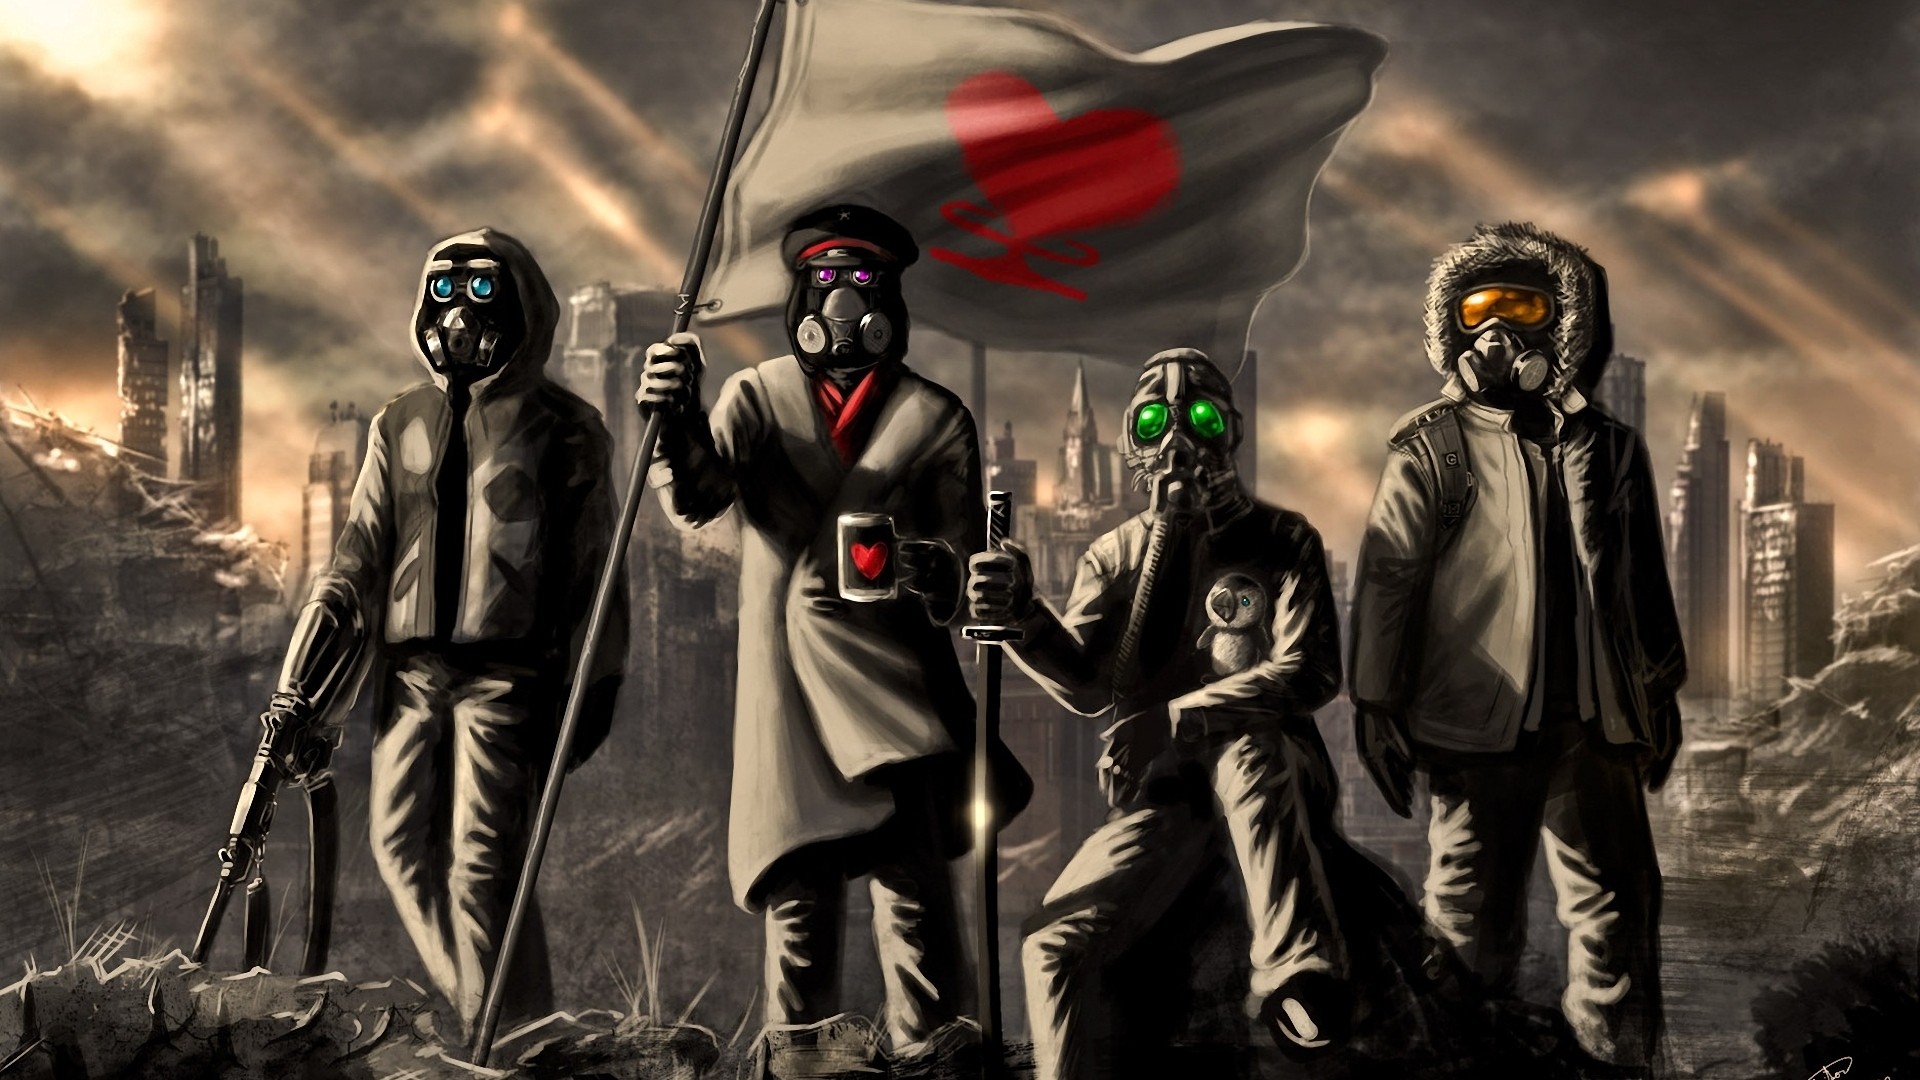 gas masks, Anime, Gone with the Blastwave, Romantically Apocalyptic, Digital art Wallpaper